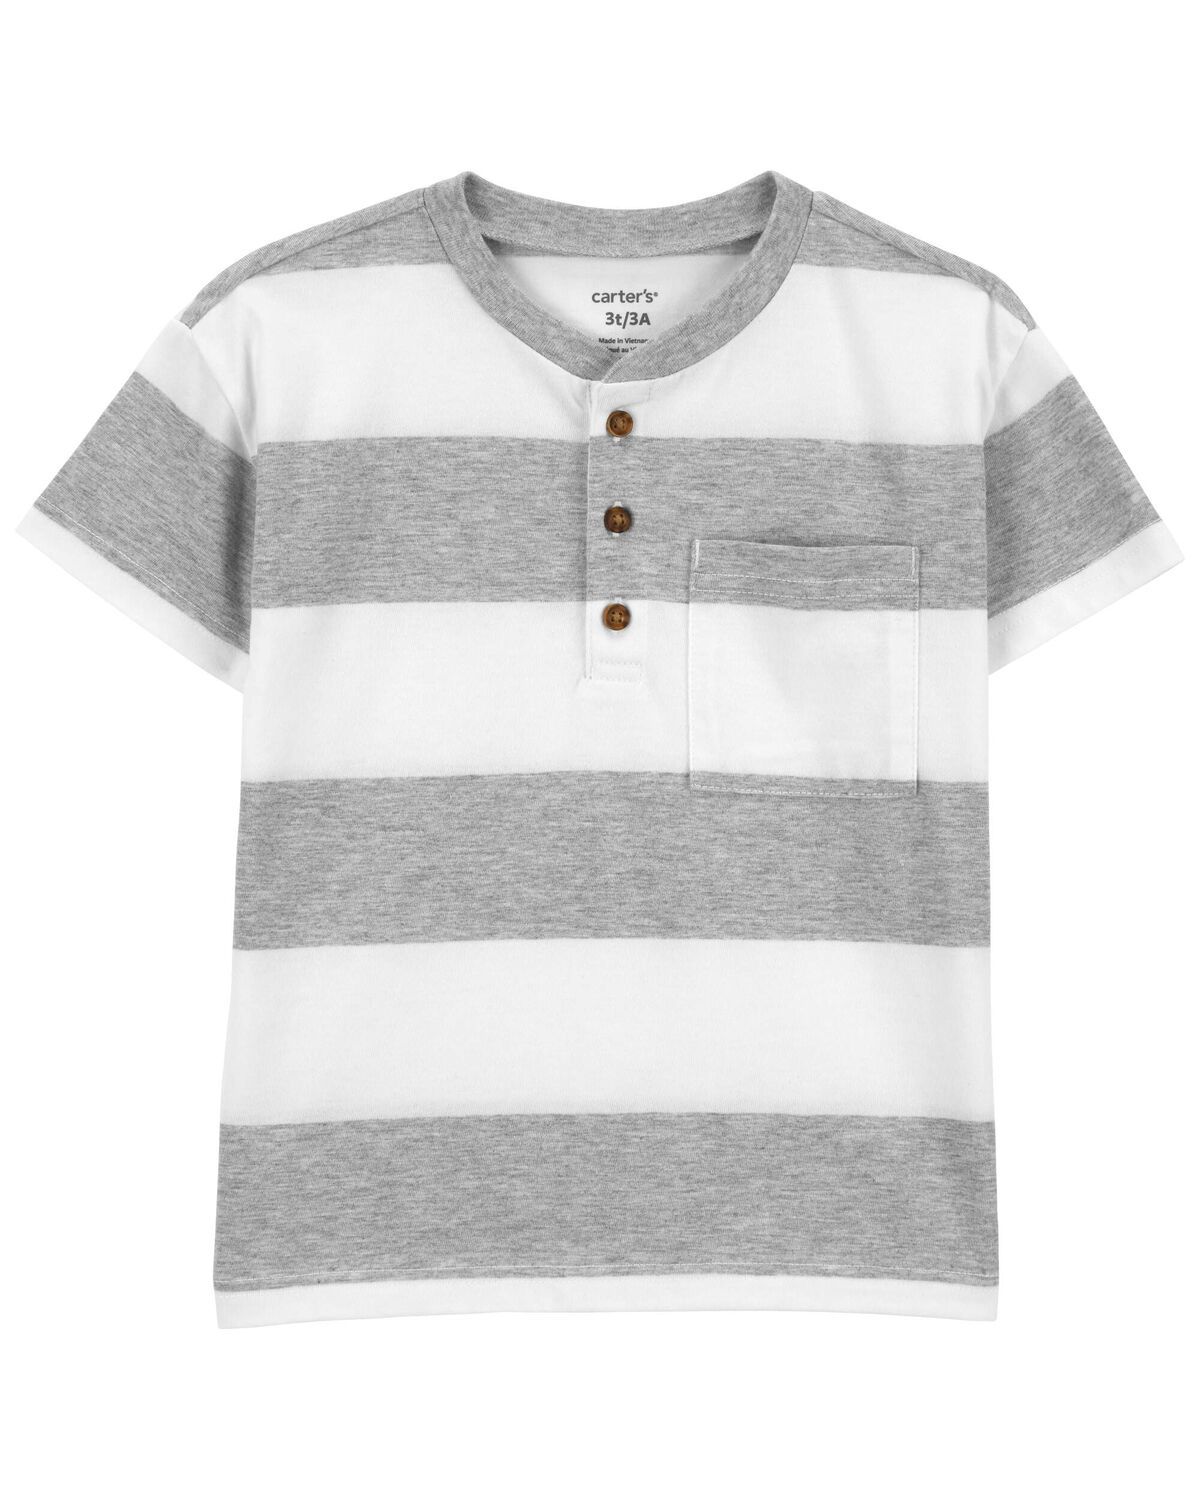 White/Grey Toddler Striped Jersey Henley | carters.com | Carter's